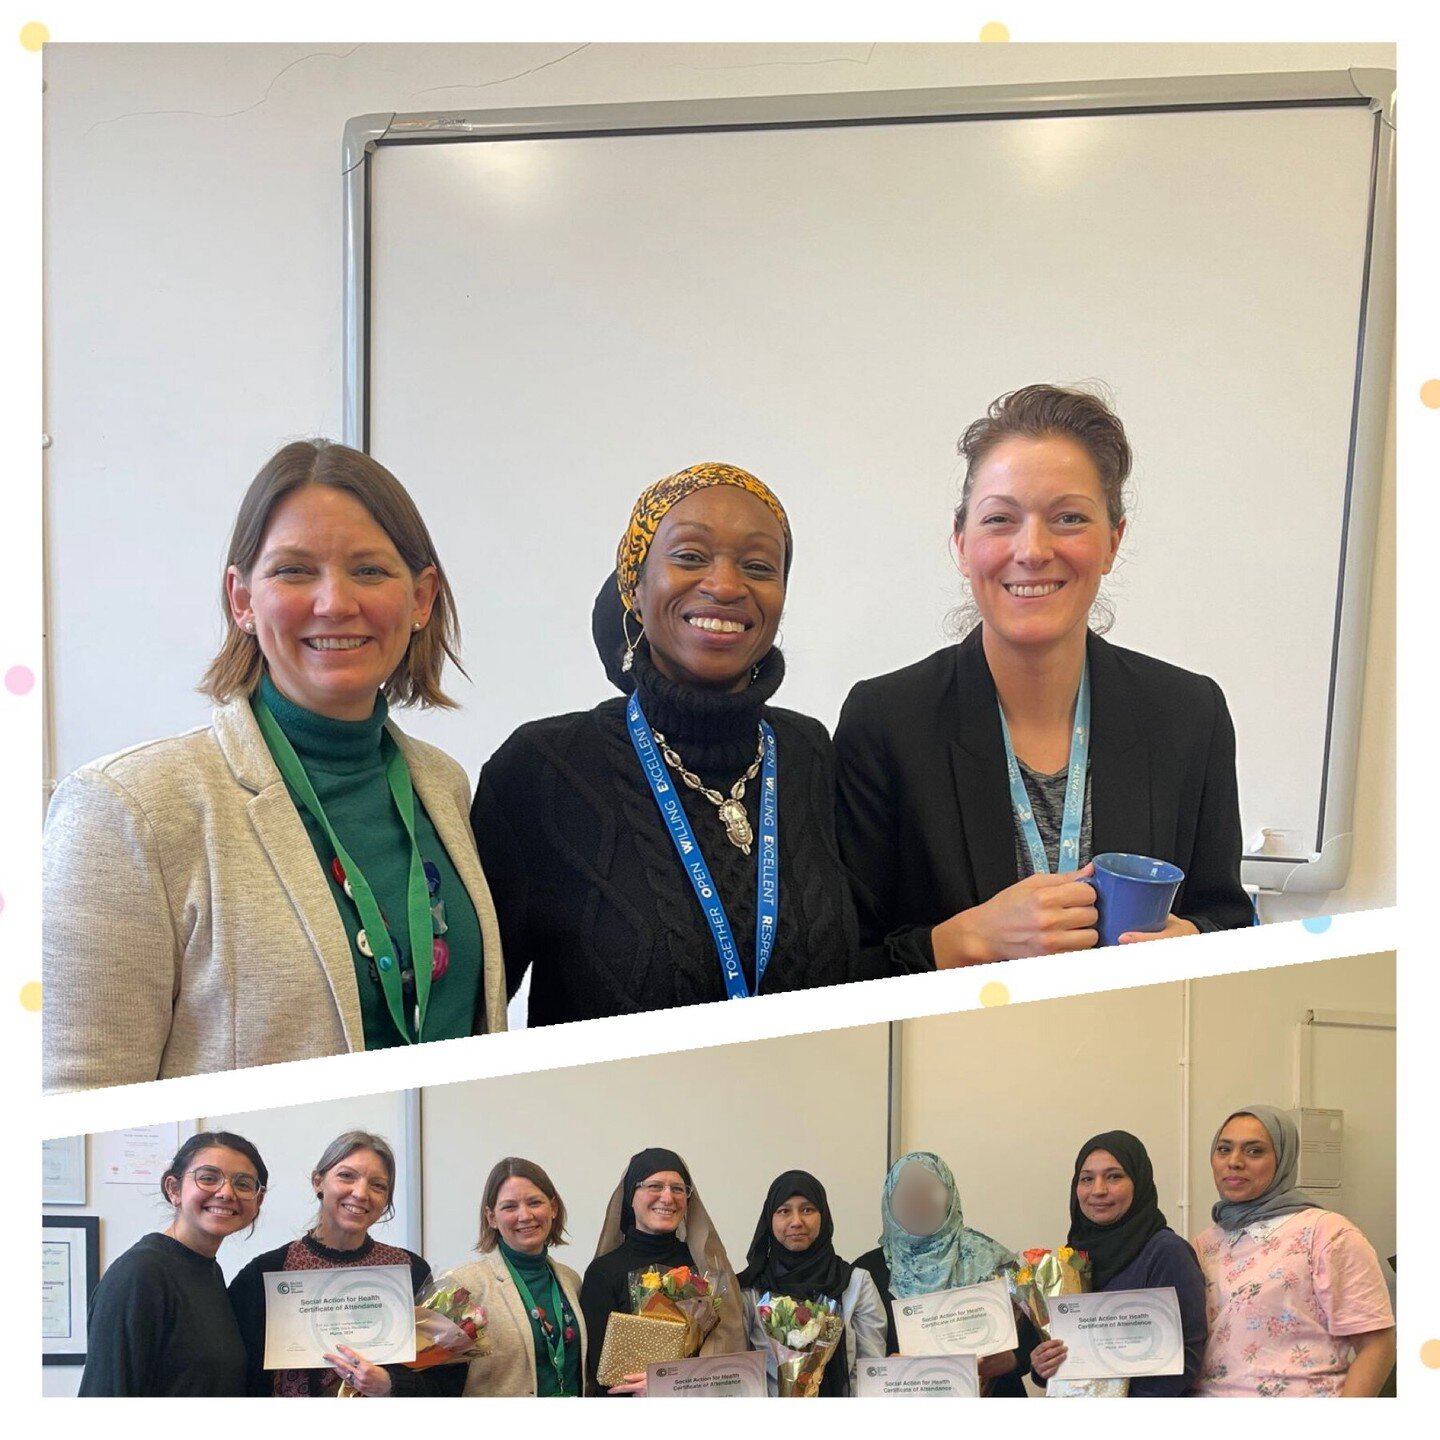 Massive congratulations to our amazing Sure STEPS team who recently completed their work placement with us. Thank you also to our colleagues from Tower Hamlets IPSPC WorkPath for meeting with the group to discuss next steps into employment.